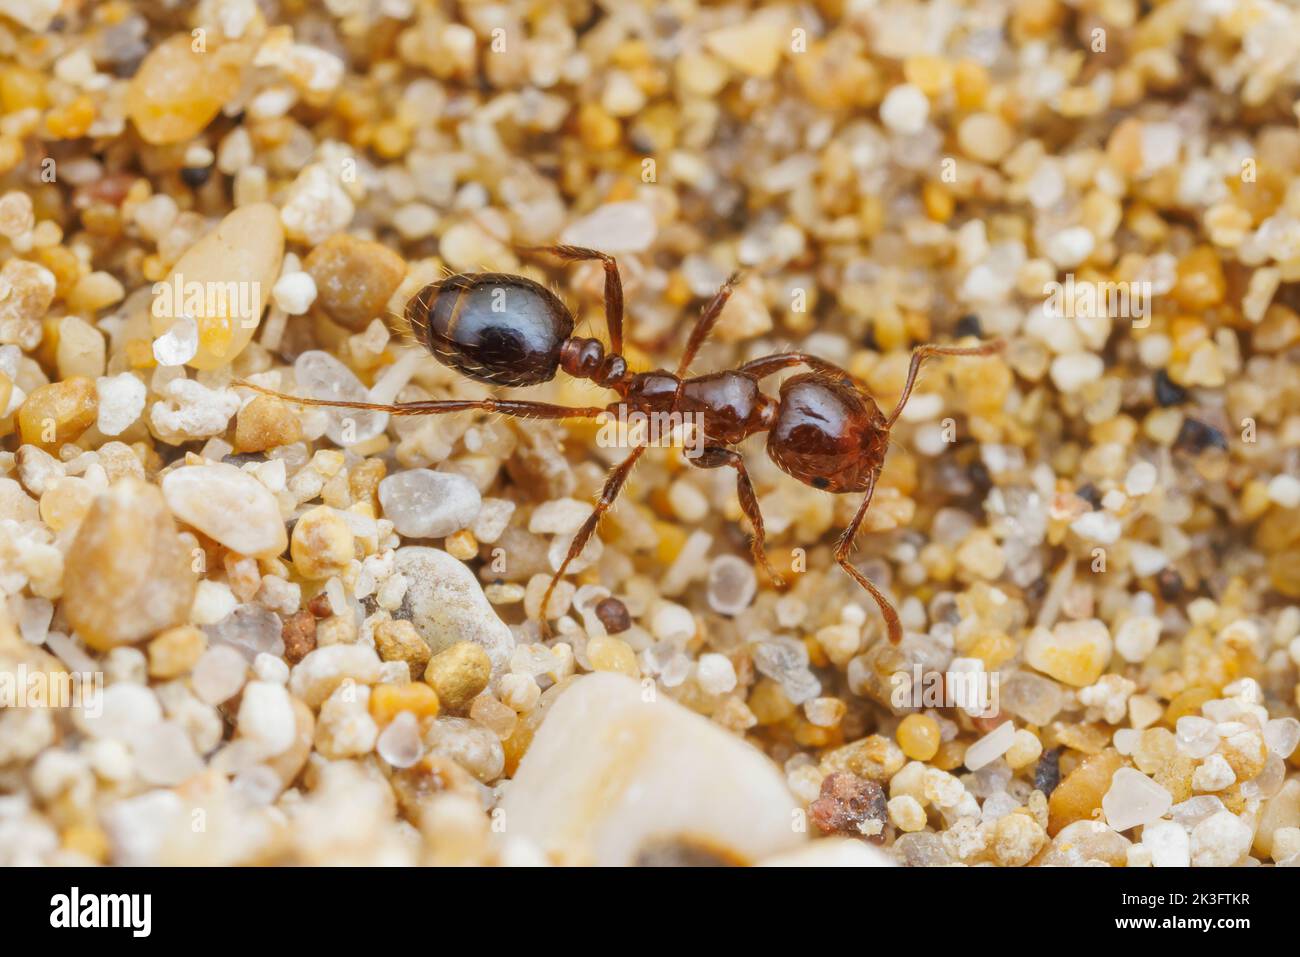 A Red Imported Fire Ant (Solenopsis invicta) forages on a beach. Stock Photo